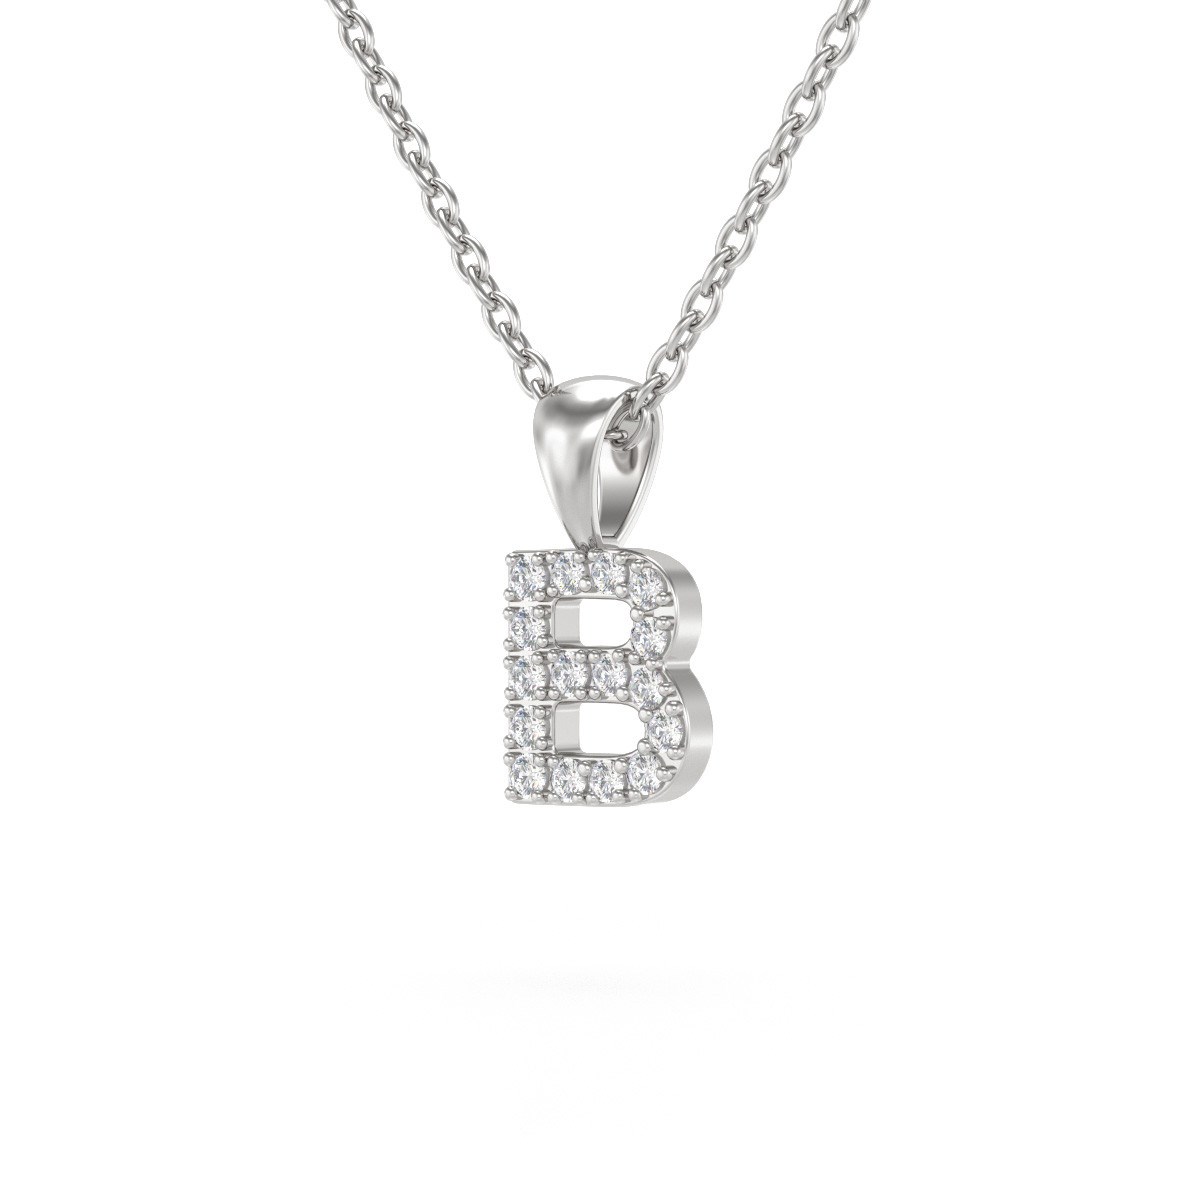 Collier Pendentif ADEN Lettre B Or 750 Blanc Diamant Chaine Or 750 incluse 0.72grs - vue 3